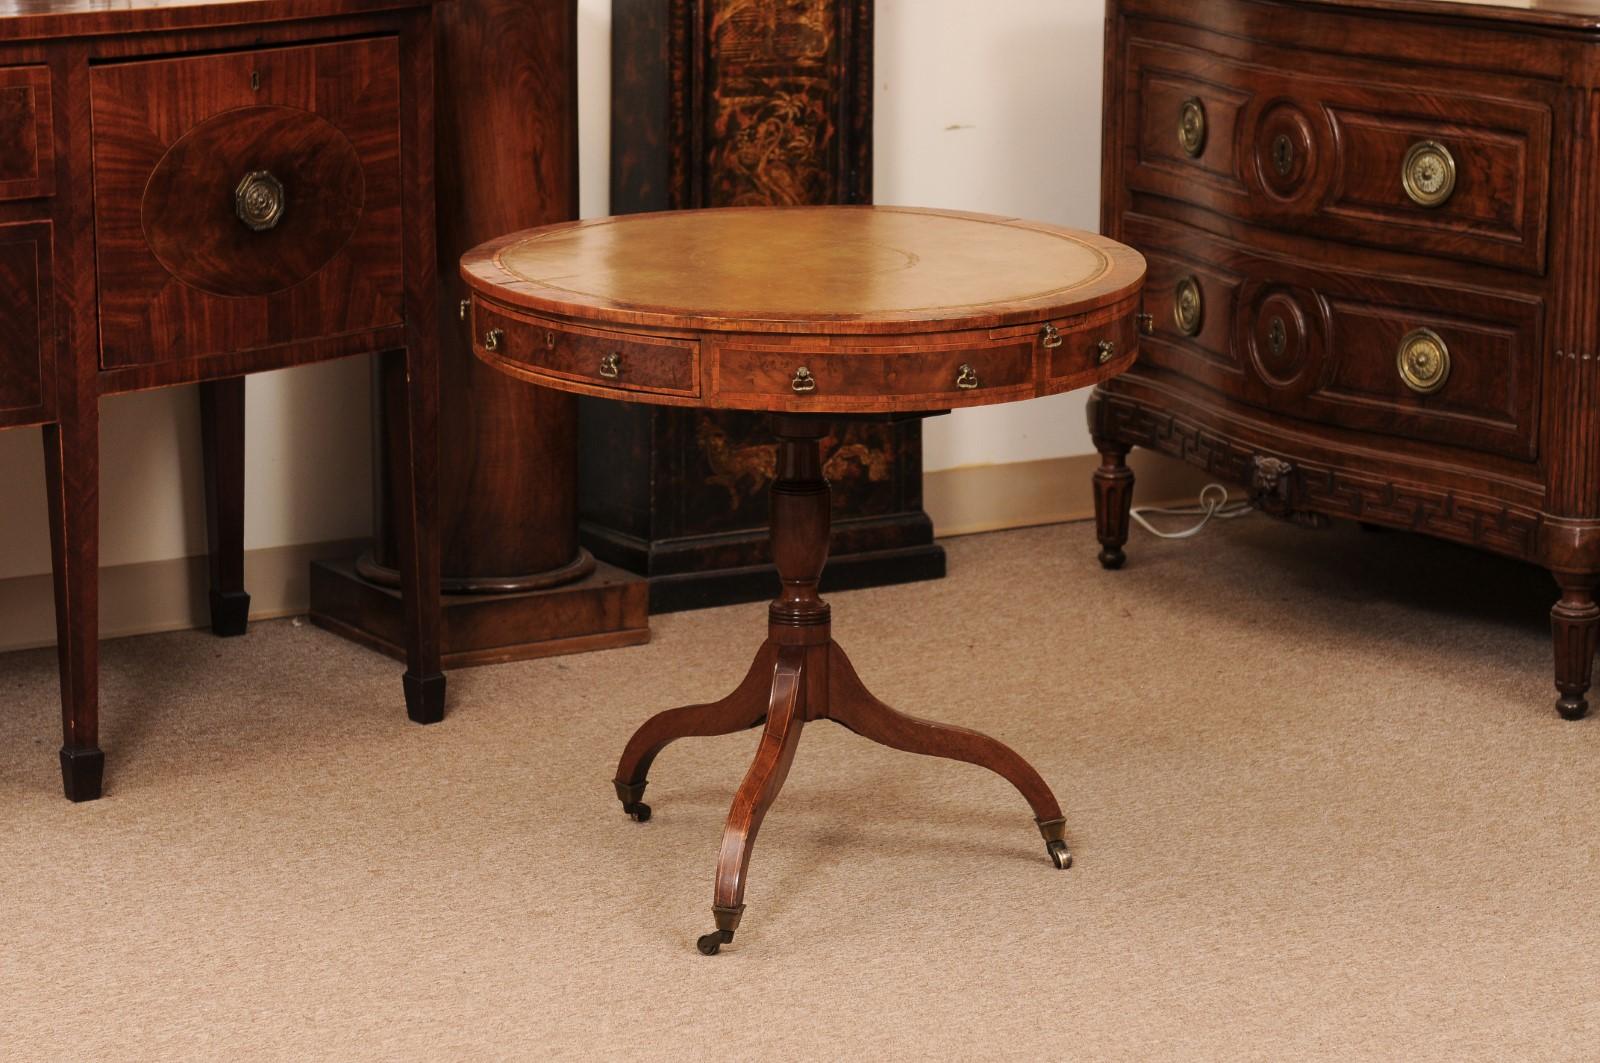 18th Century English Small Mulberry Drum Table with Inlay & Leather Top For Sale 10